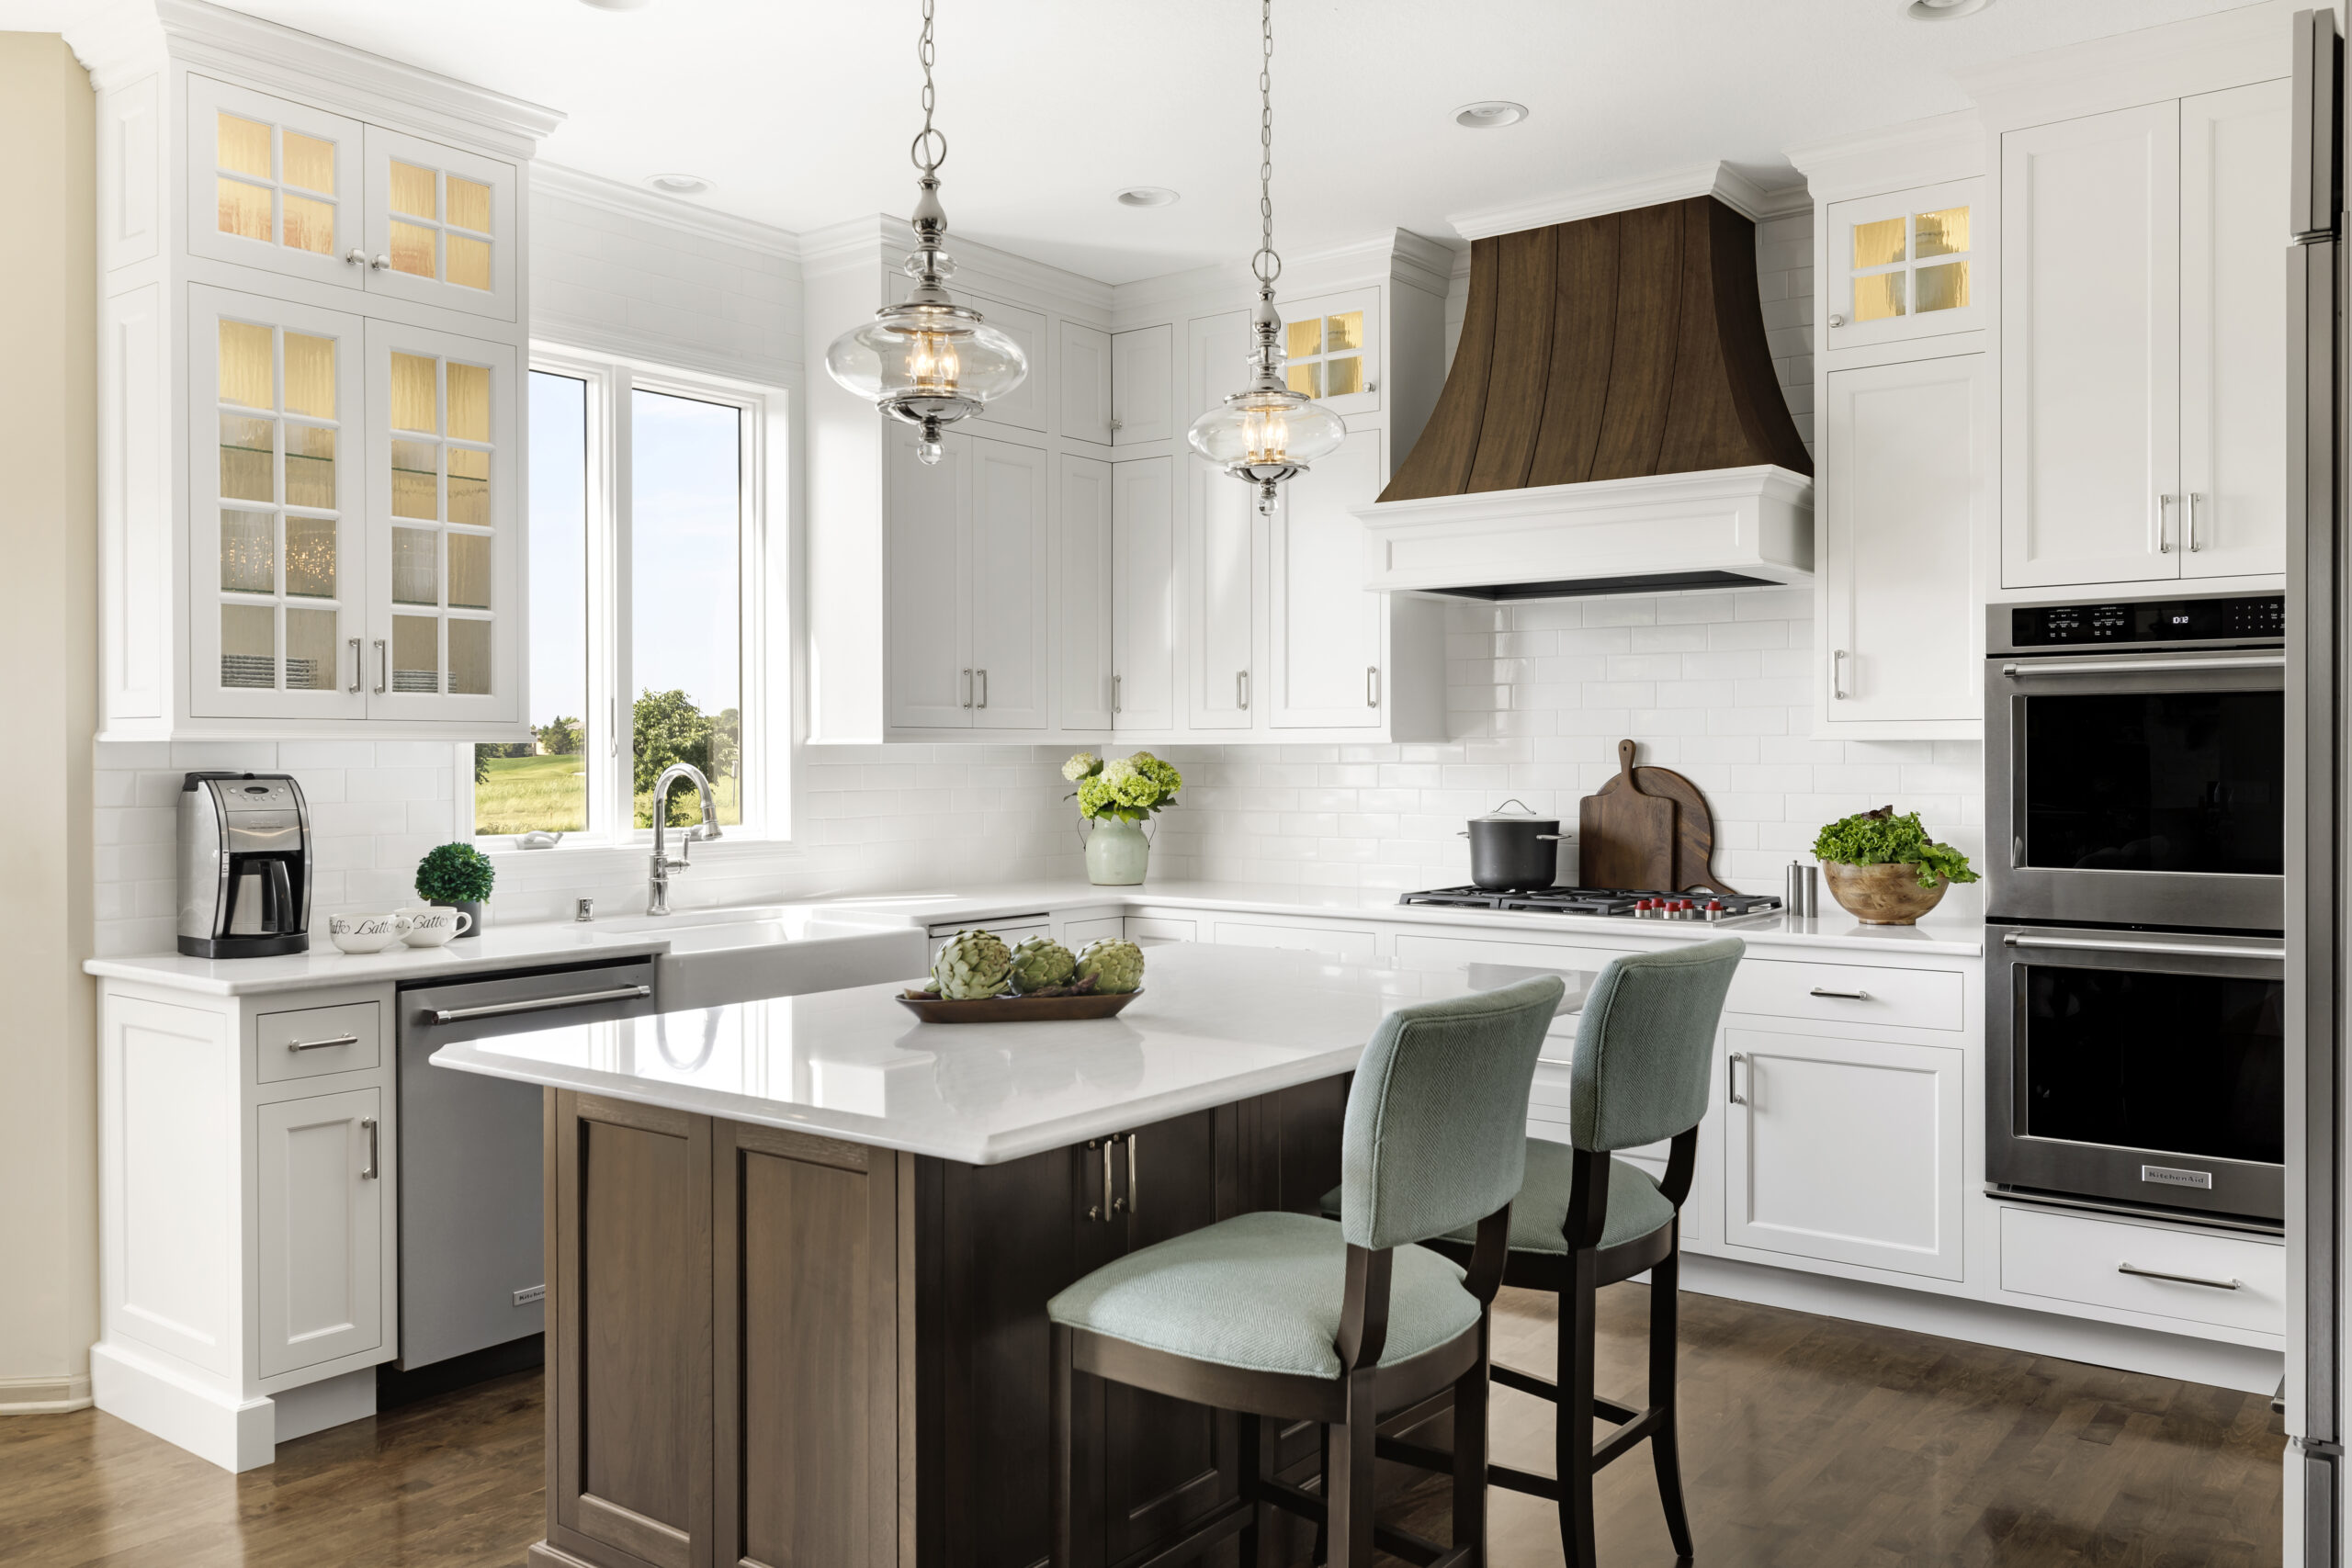 Kitchen remodel with large wooden island and white surrounding cabinets